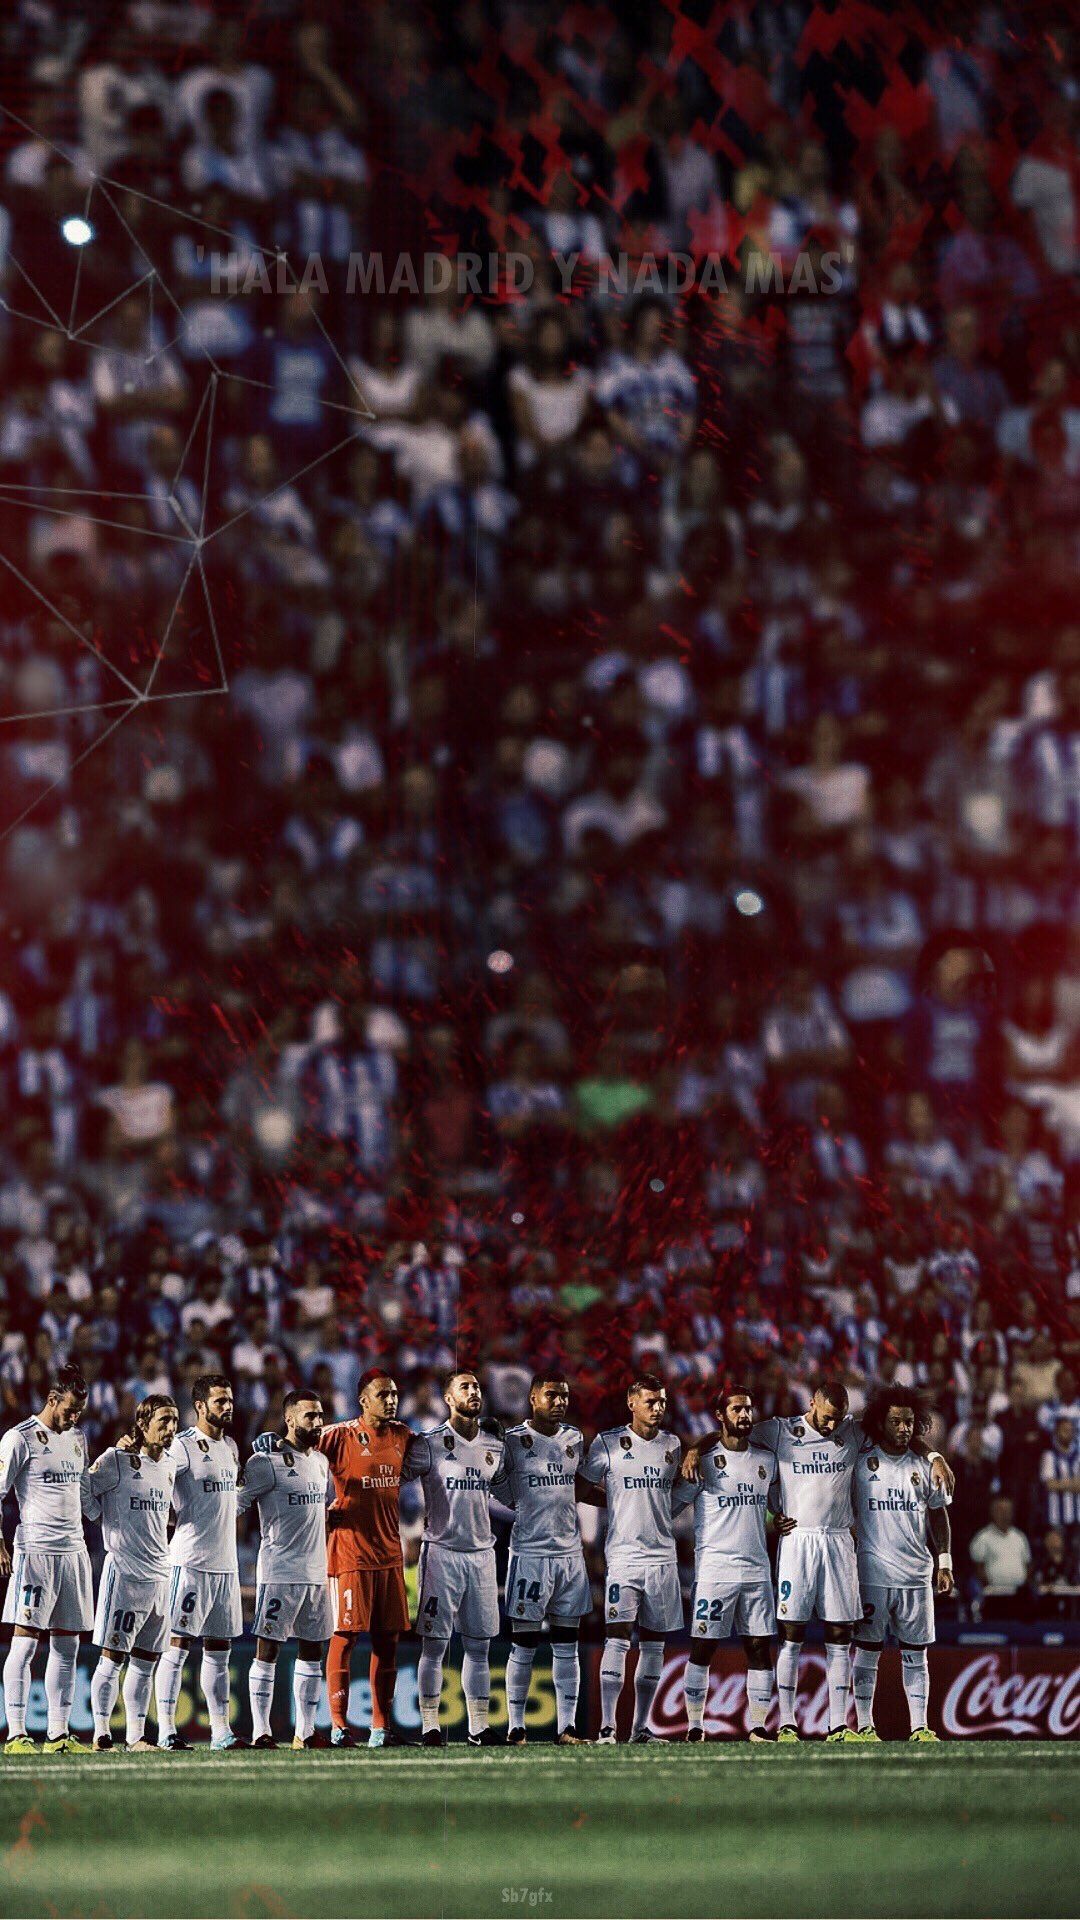 The Best Team in Europe. Real madrid wallpaper, Real madrid photo, Real madrid team